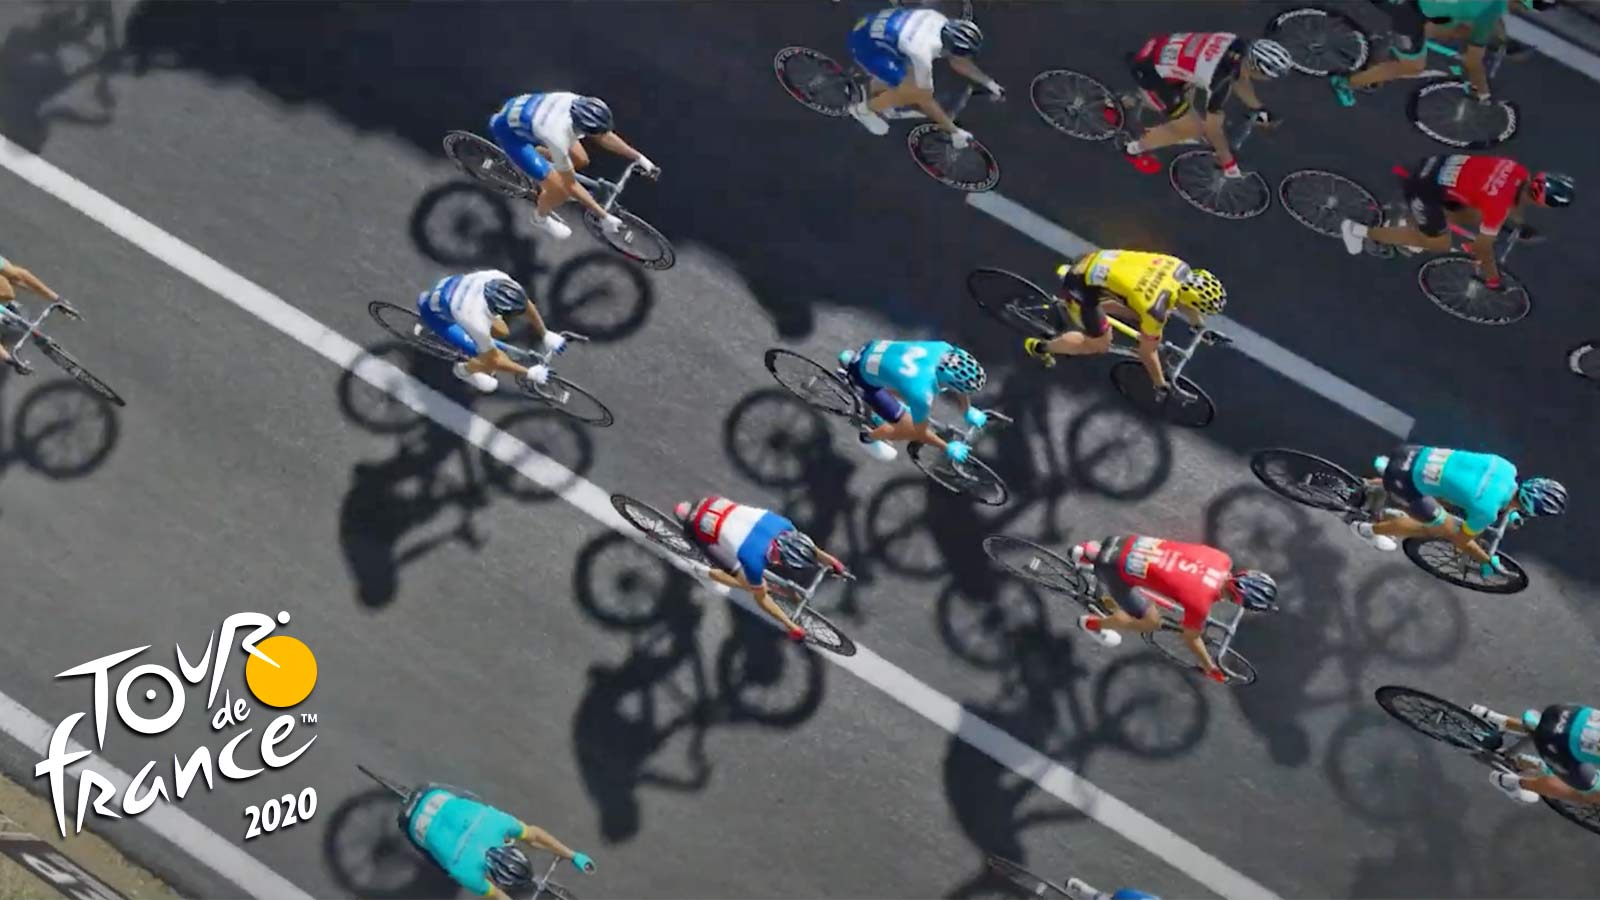 Race the Tour de France 2020 this summer from home, on your gaming console or PC